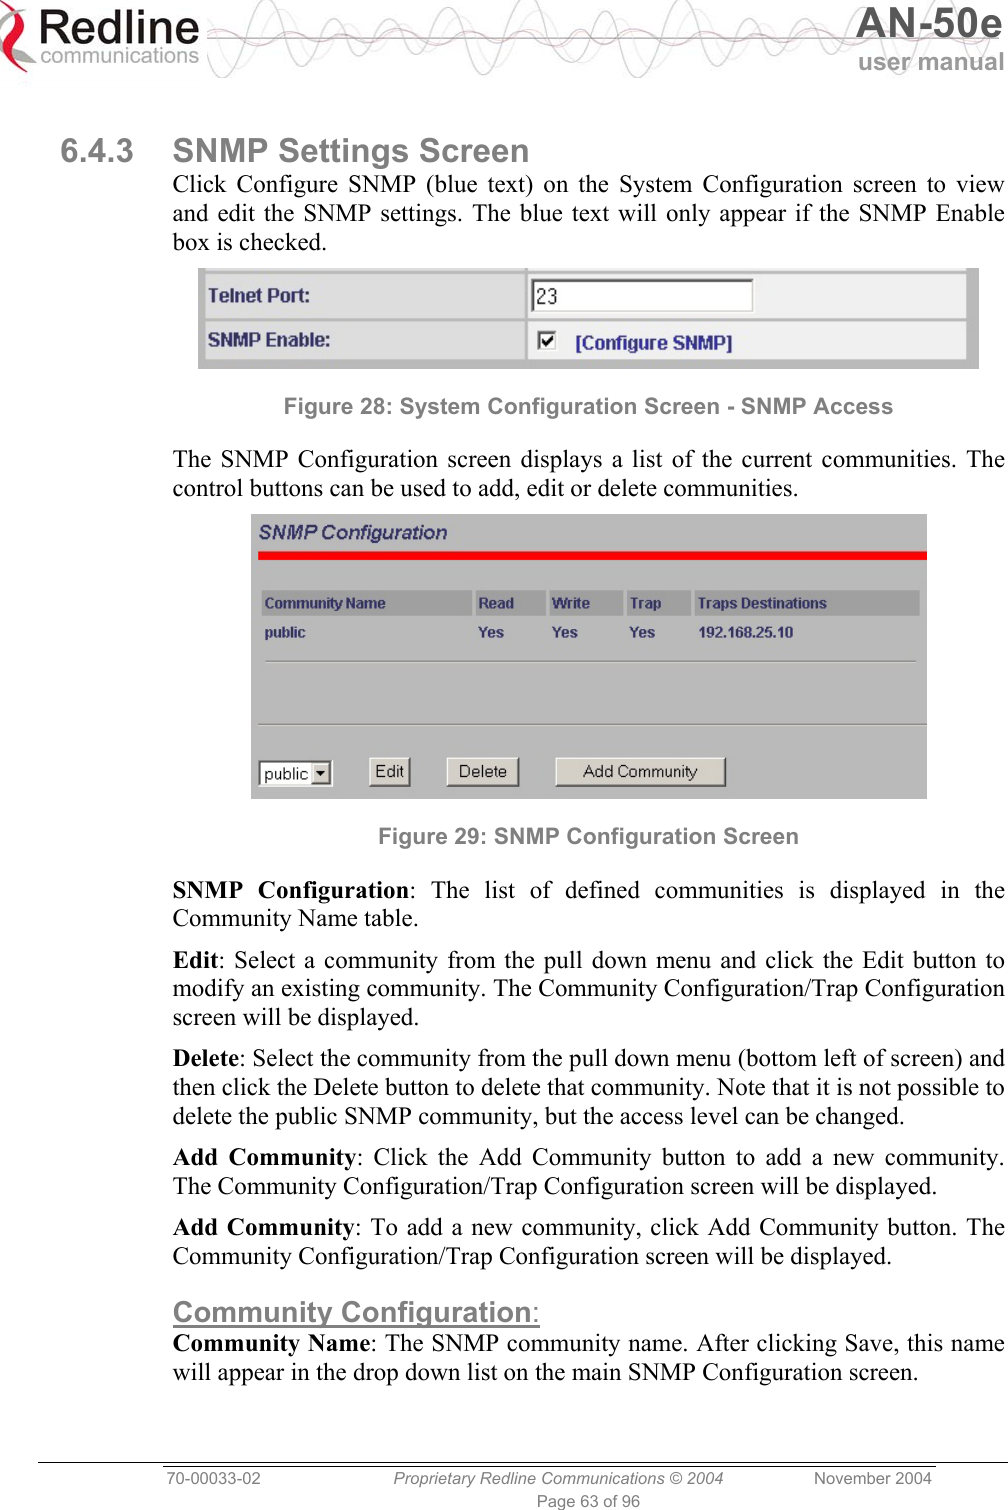   AN-50e user manual  70-00033-02  Proprietary Redline Communications © 2004 November 2004 Page 63 of 96  6.4.3  SNMP Settings Screen Click Configure SNMP (blue text) on the System Configuration screen to view and edit the SNMP settings. The blue text will only appear if the SNMP Enable box is checked.  Figure 28: System Configuration Screen - SNMP Access The SNMP Configuration screen displays a list of the current communities. The control buttons can be used to add, edit or delete communities.  Figure 29: SNMP Configuration Screen  SNMP Configuration: The list of defined communities is displayed in the Community Name table. Edit: Select a community from the pull down menu and click the Edit button to modify an existing community. The Community Configuration/Trap Configuration screen will be displayed. Delete: Select the community from the pull down menu (bottom left of screen) and then click the Delete button to delete that community. Note that it is not possible to delete the public SNMP community, but the access level can be changed. Add Community: Click the Add Community button to add a new community. The Community Configuration/Trap Configuration screen will be displayed. Add Community: To add a new community, click Add Community button. The Community Configuration/Trap Configuration screen will be displayed. Community Configuration: Community Name: The SNMP community name. After clicking Save, this name will appear in the drop down list on the main SNMP Configuration screen. 